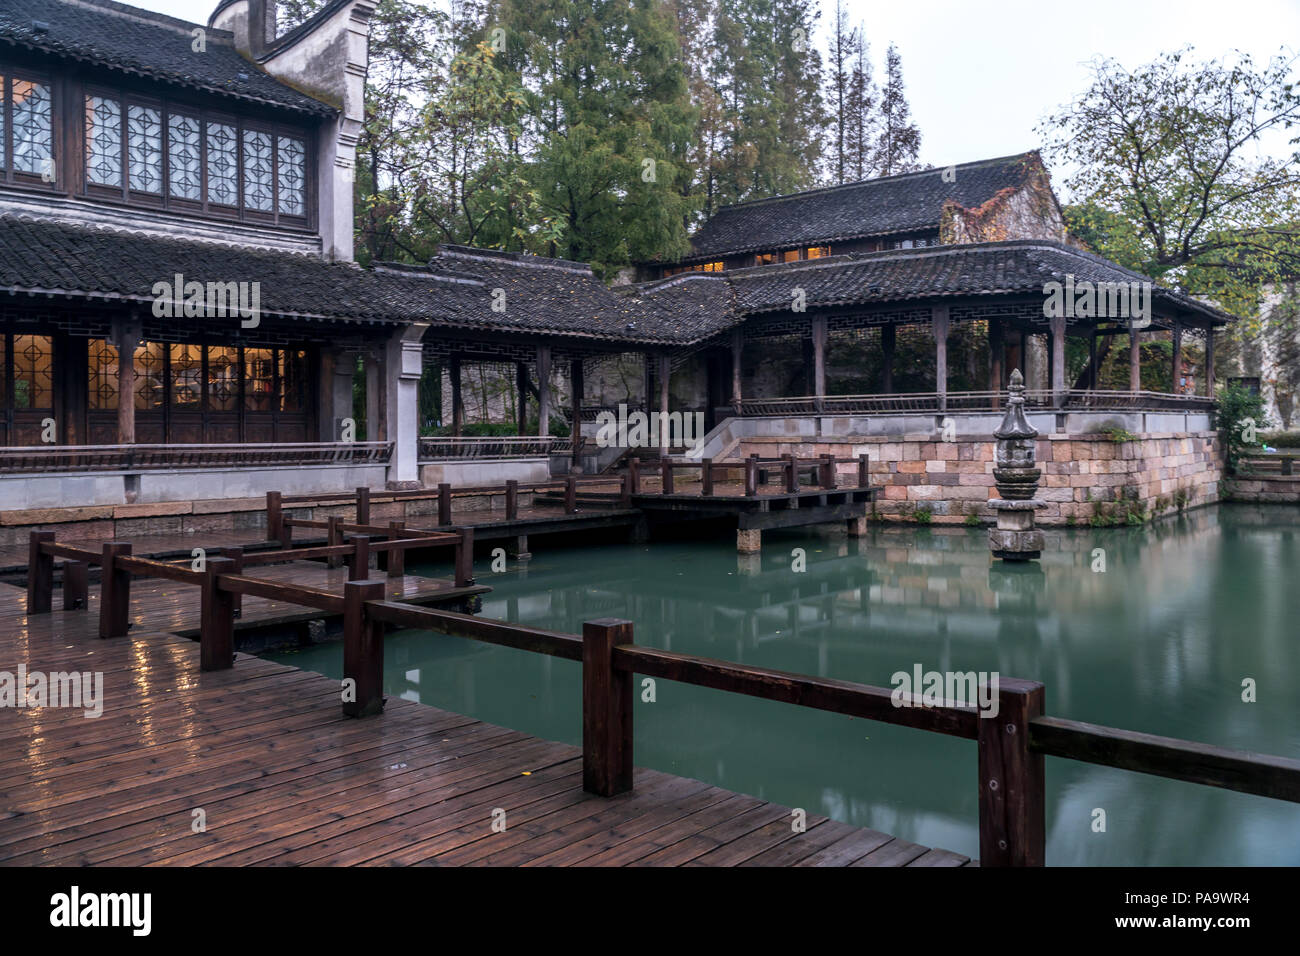 Wuzhen, a famous water town in China Stock Photo - Alamy